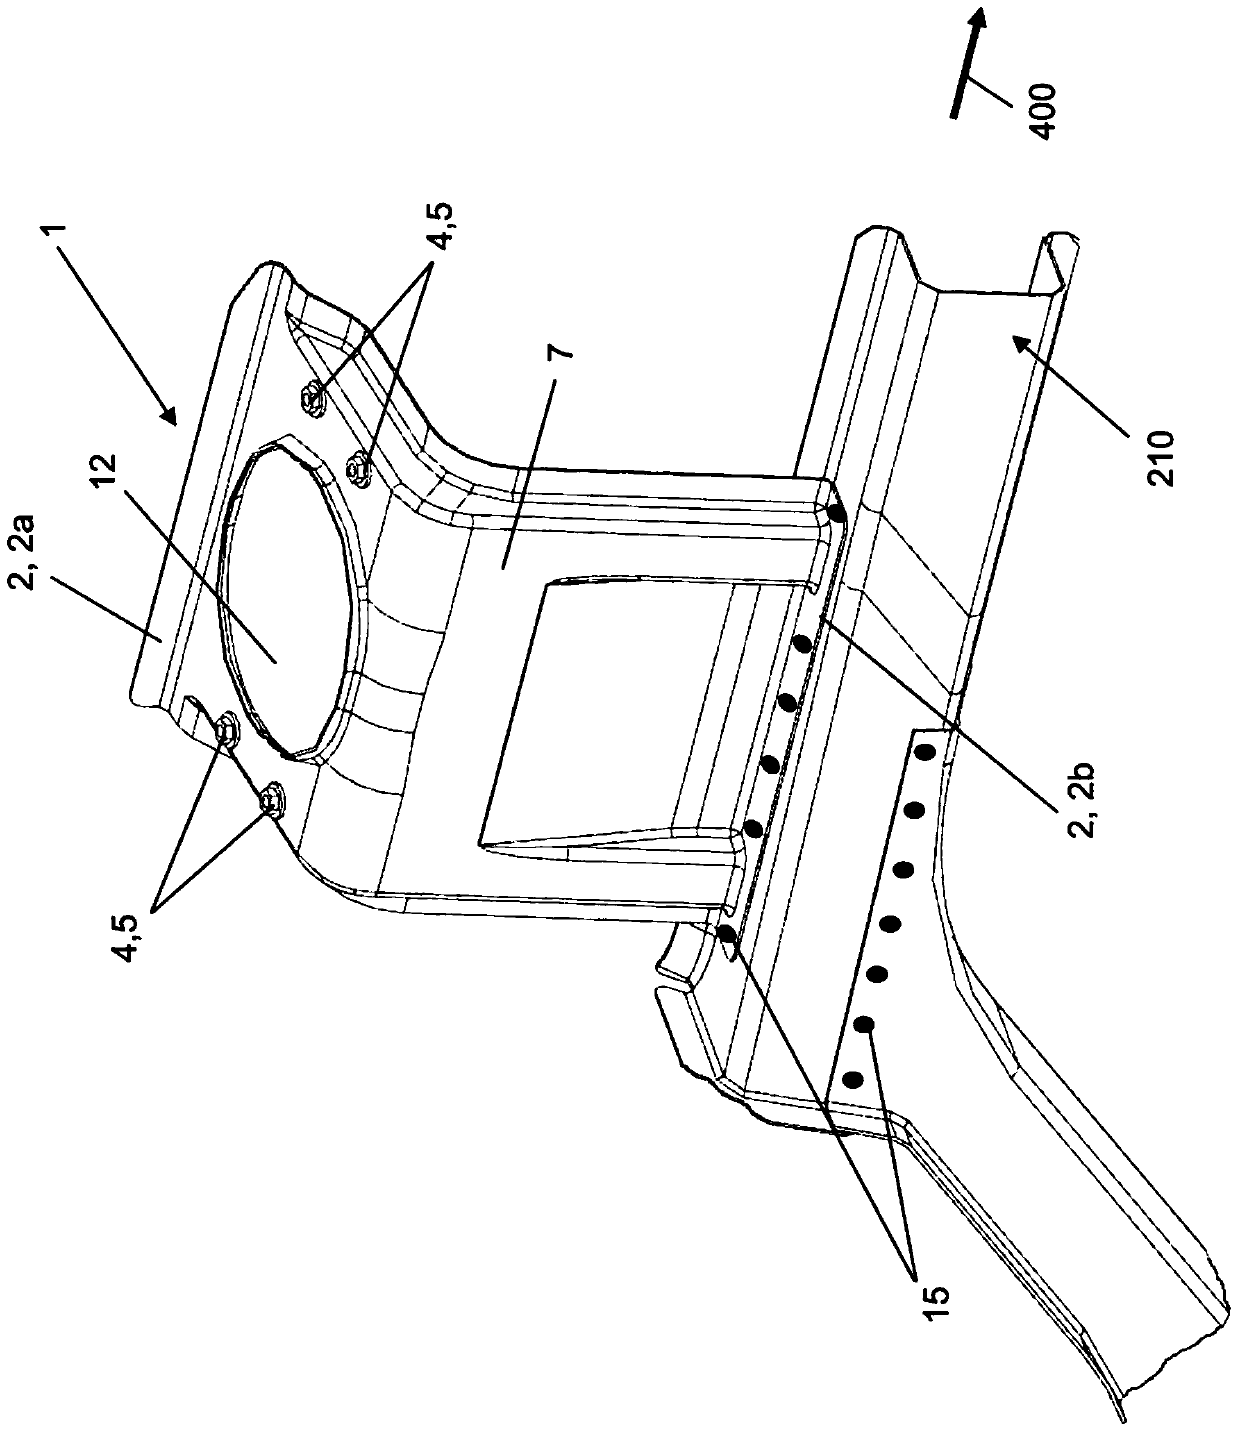 Support structure part and spring leg bushing for connecting spring leg to vehicle body